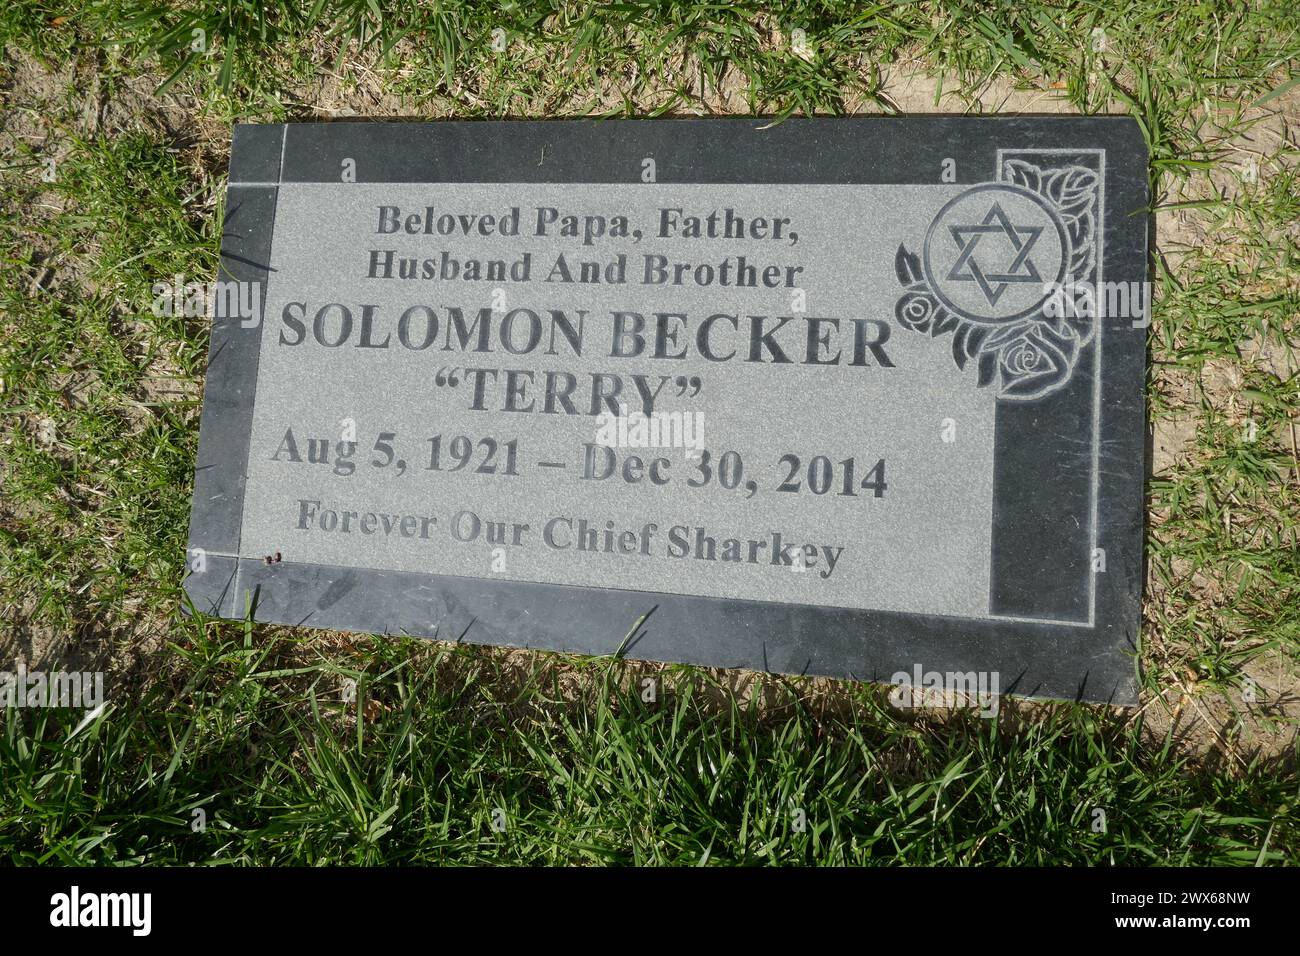 Mission Hills, California, USA 26th March 2024 Actor/Director/Producer Terry Becker Grave at Eden Memorial Park on March 26, 2024 in Mission Hills, California, USA. He worked on Voyage to the Bottom of the Sea, The Mod Squad, Mission Impossible, MASH, Bonanza, Perry Mason, Gunsmoke, and many others. Photo by Barry King/Alamy Stock Photo Stock Photo